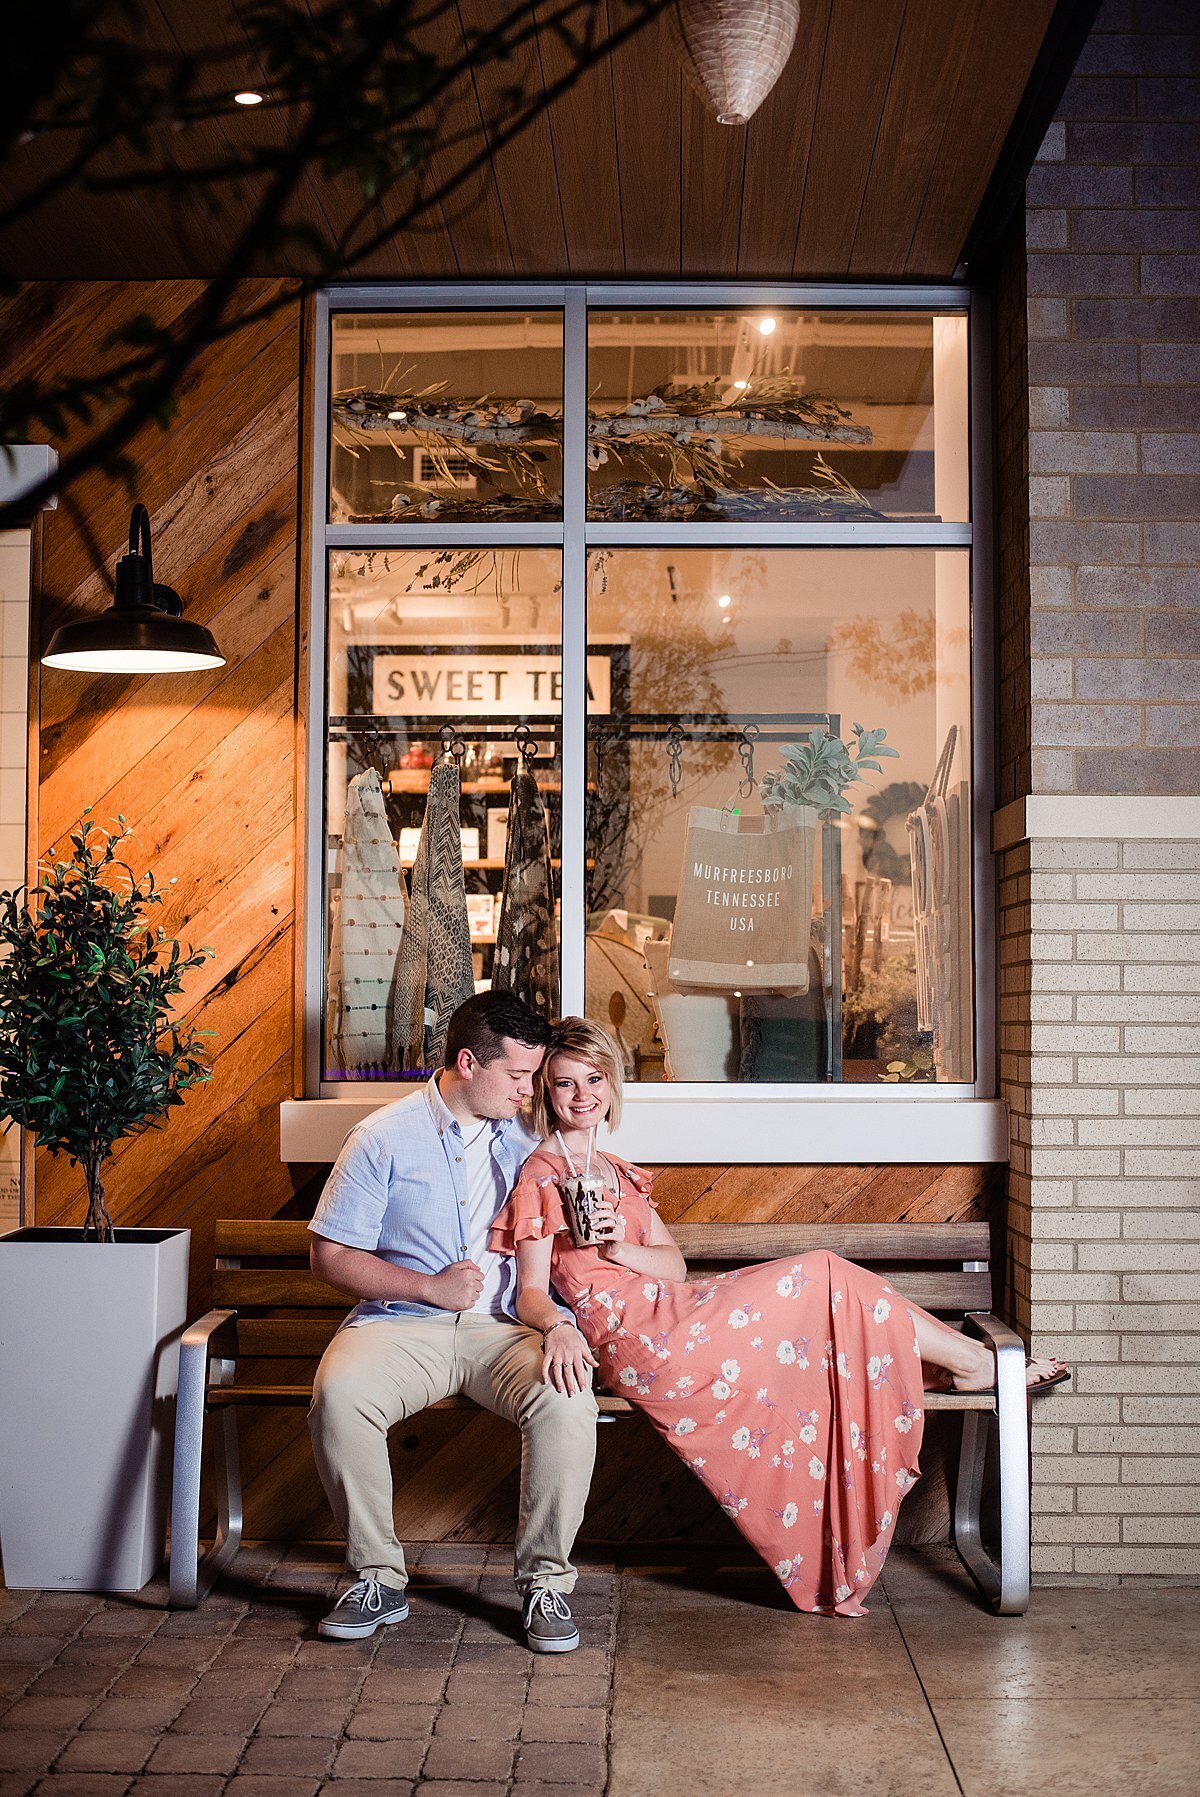 The bride and groom sit on a metal park bench in front of a large glass store window with a sweet tea sign. The  groom sits on the bench with his feet on the ground looking over at the bride. He is wearing khaki pants, a white t shirt and a blue button down shirt. The bride sits sideways with her back against the groom's chest and her feet propped up and she sips on a soda from a glass with a straw. She smiles at the camera. The bride is wearing a peach dress with a white floral pattern,